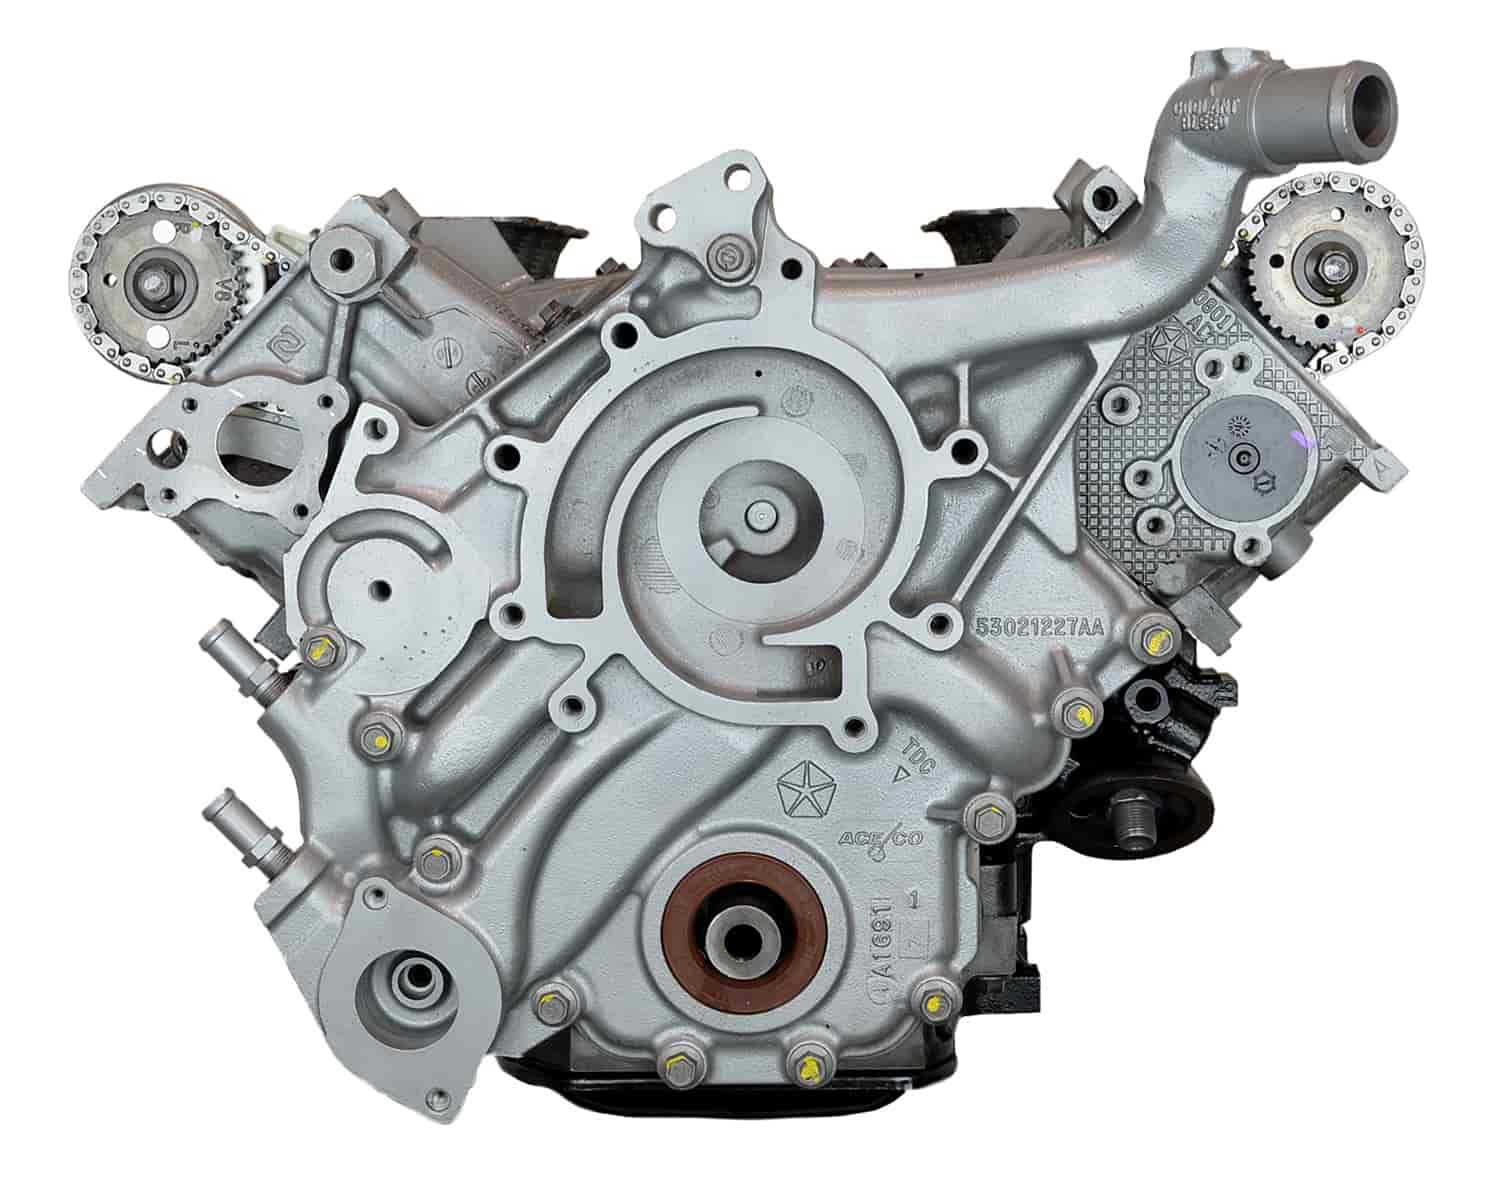 Remanufactured Crate Engine for 2002-2004 Dodge Ram Truck with 4.7L V8